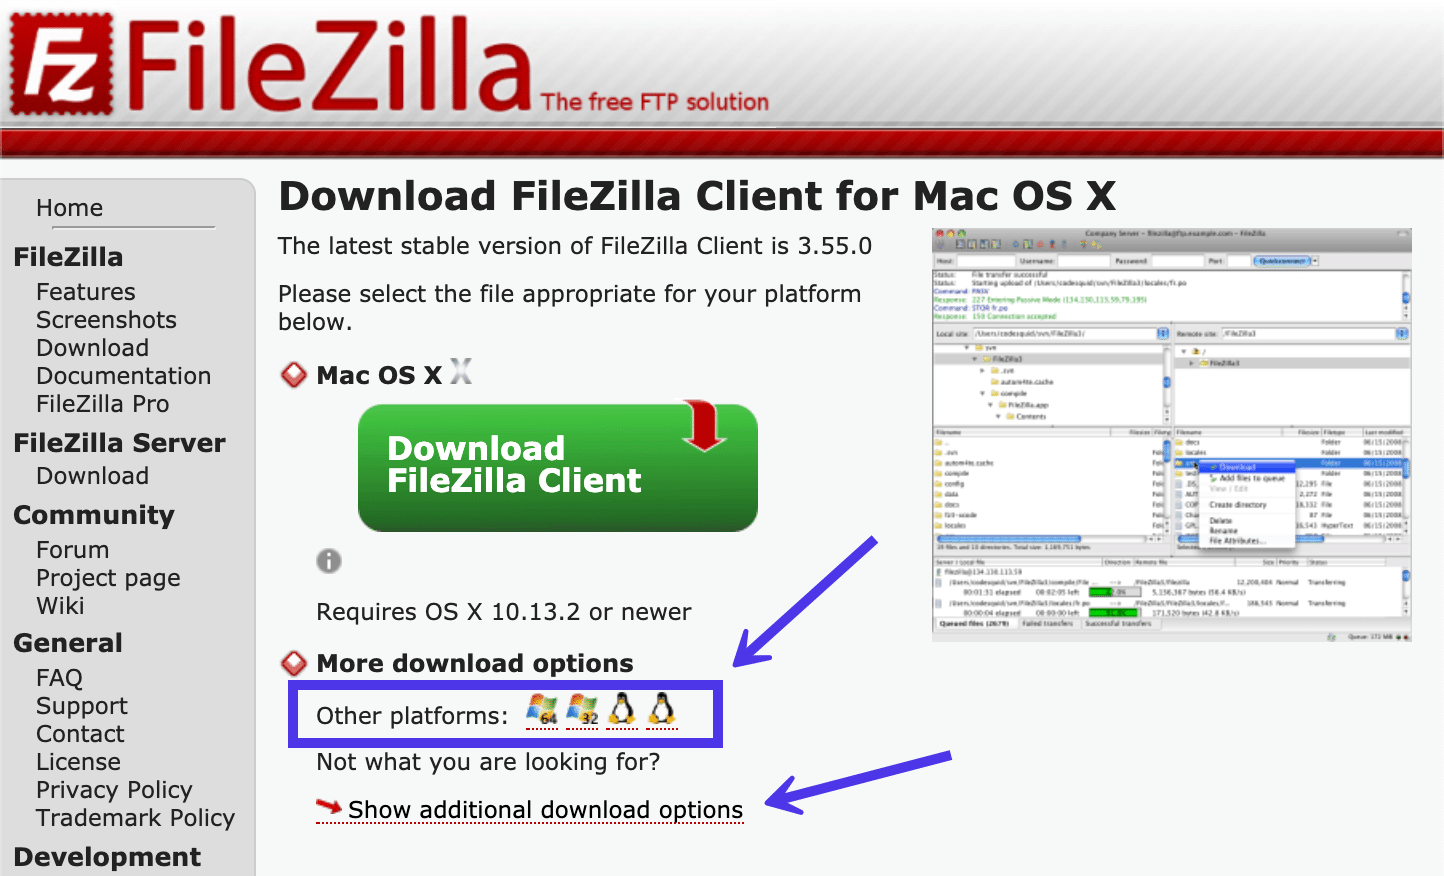 You can view FileZilla versions for other platforms.